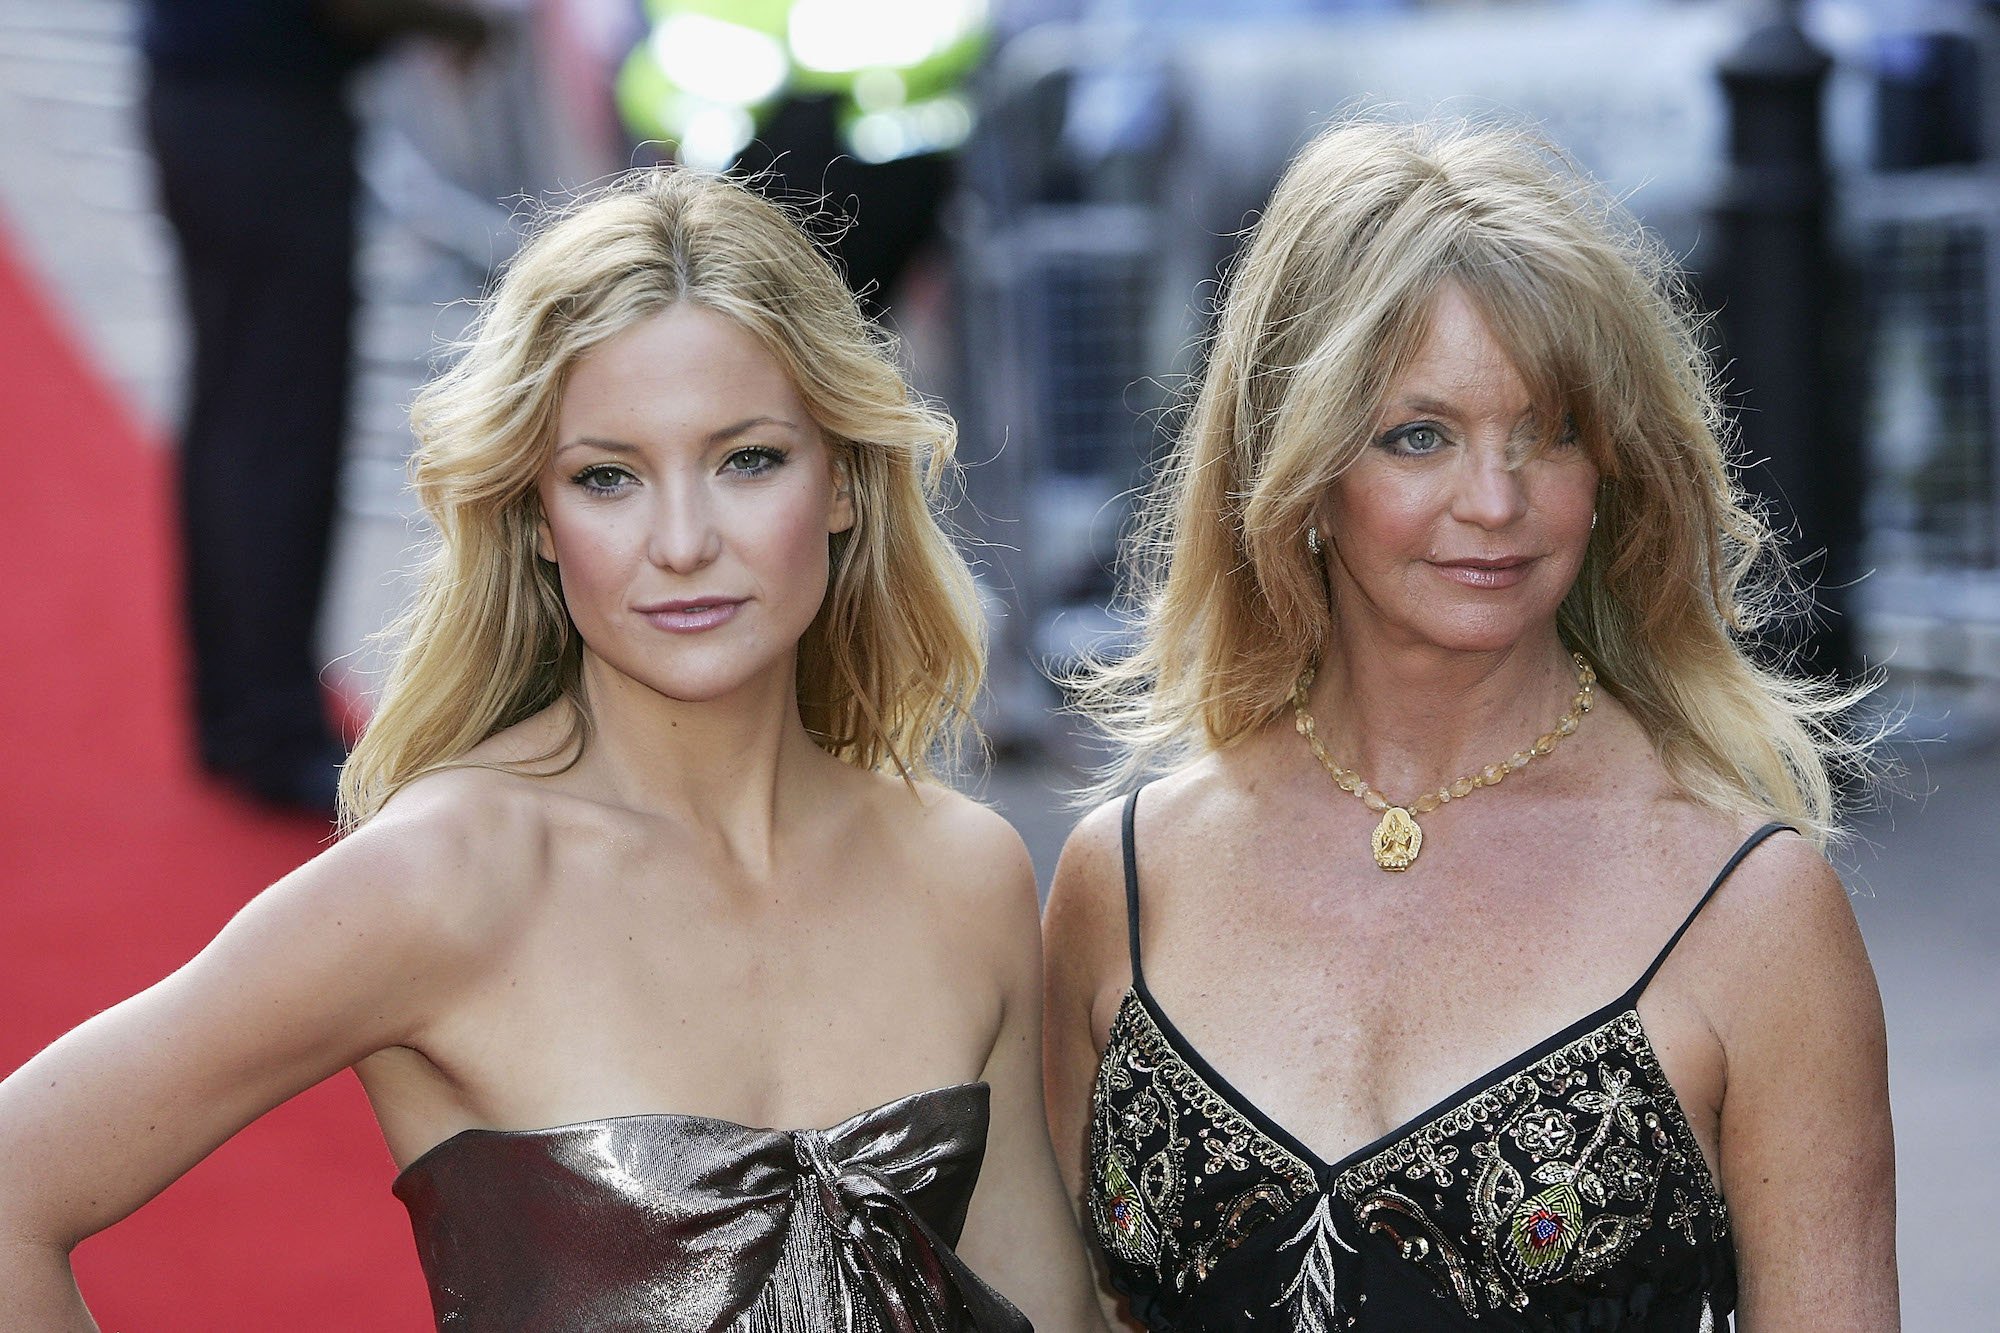 Kate Hudson and Goldie Hawn attending the premiere of "Skeleton Key" in 2005